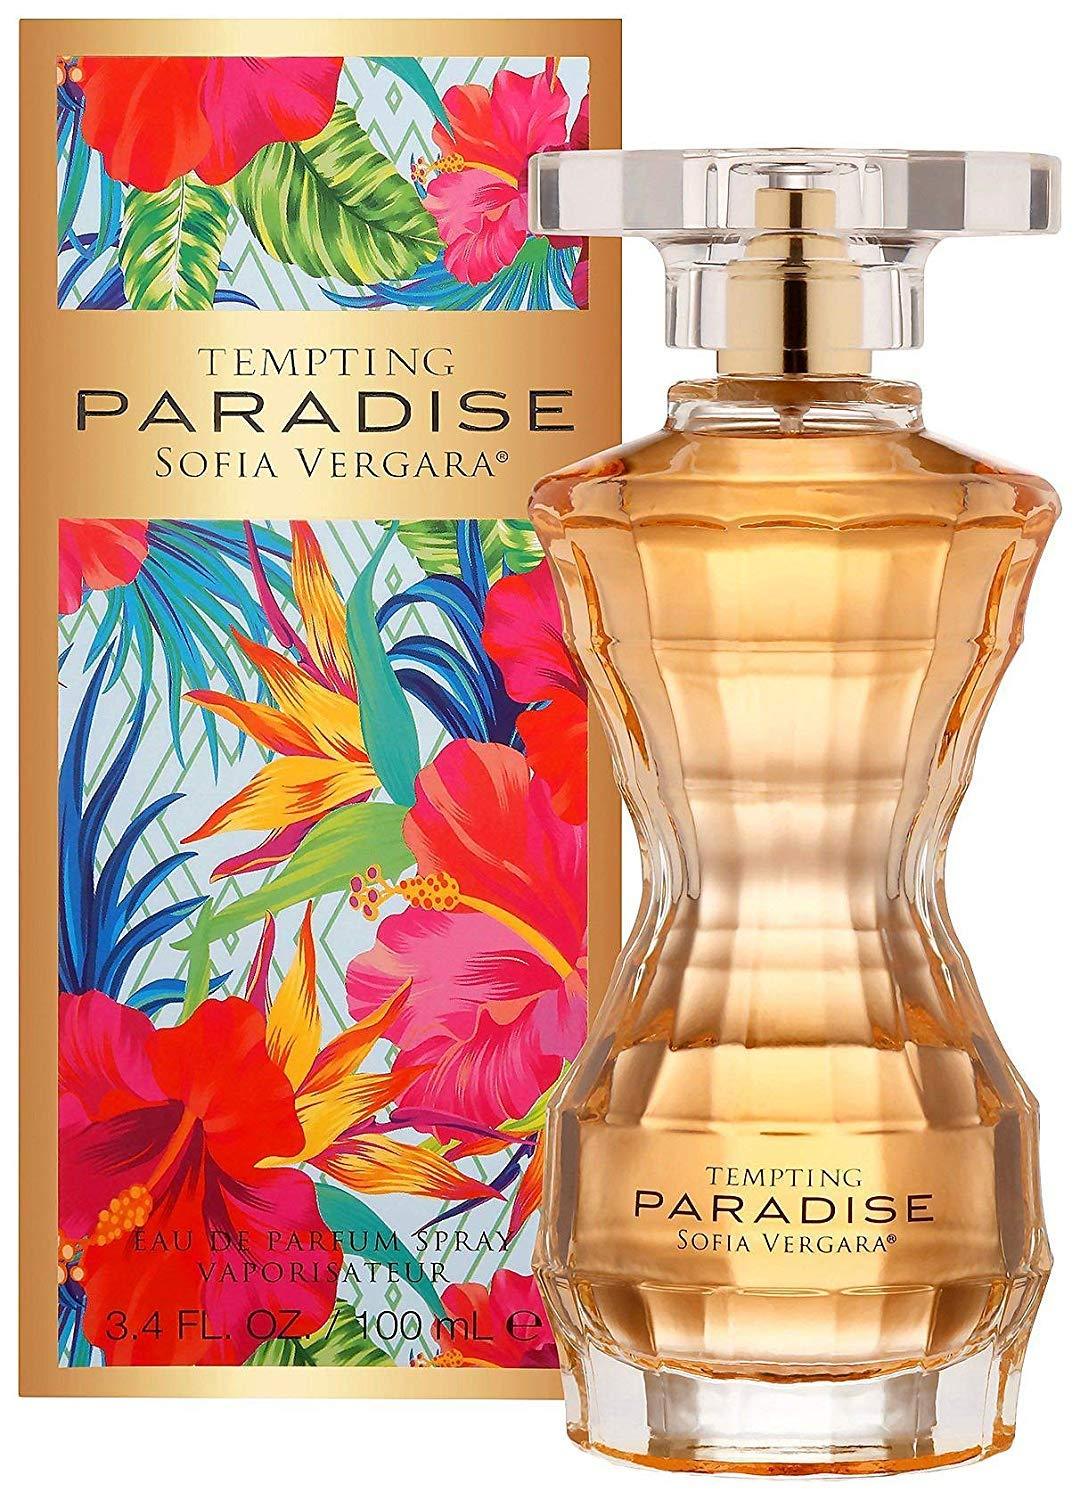 Tempting Paradise by Sofia Vergara for Women, Product image 1